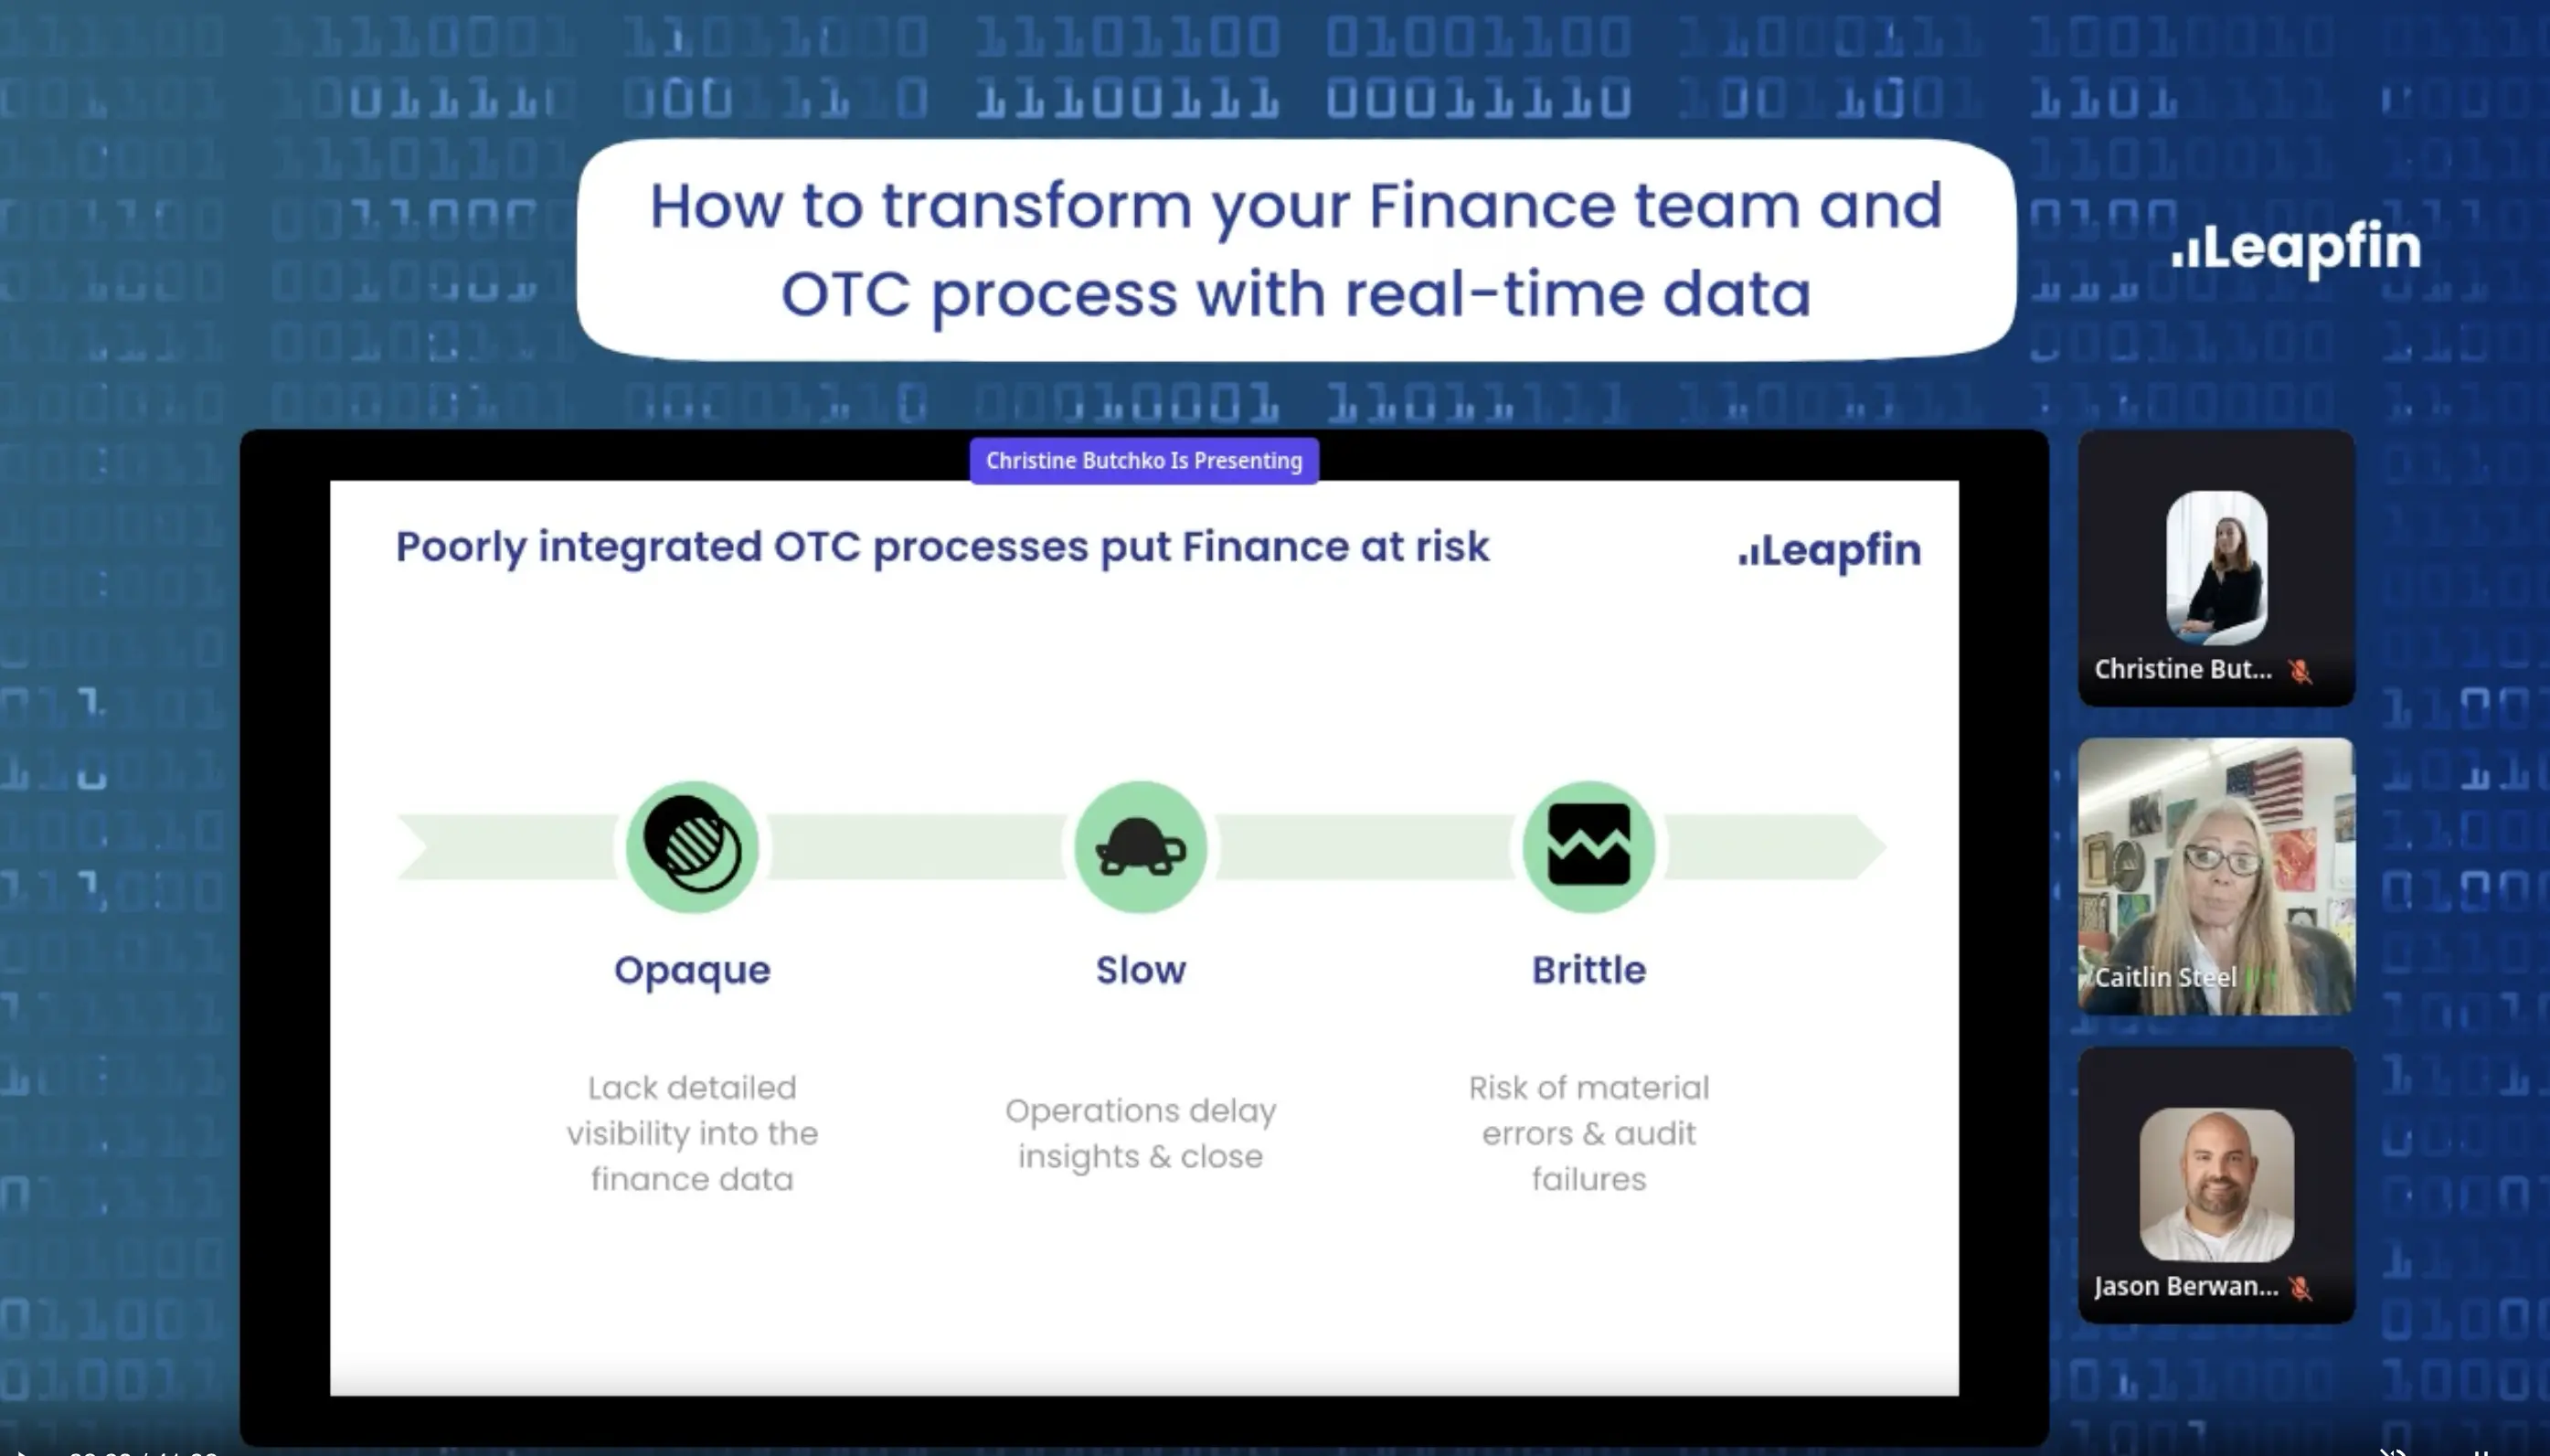 Blog post summary: Transforming your Finance team and OTC process with real-time data